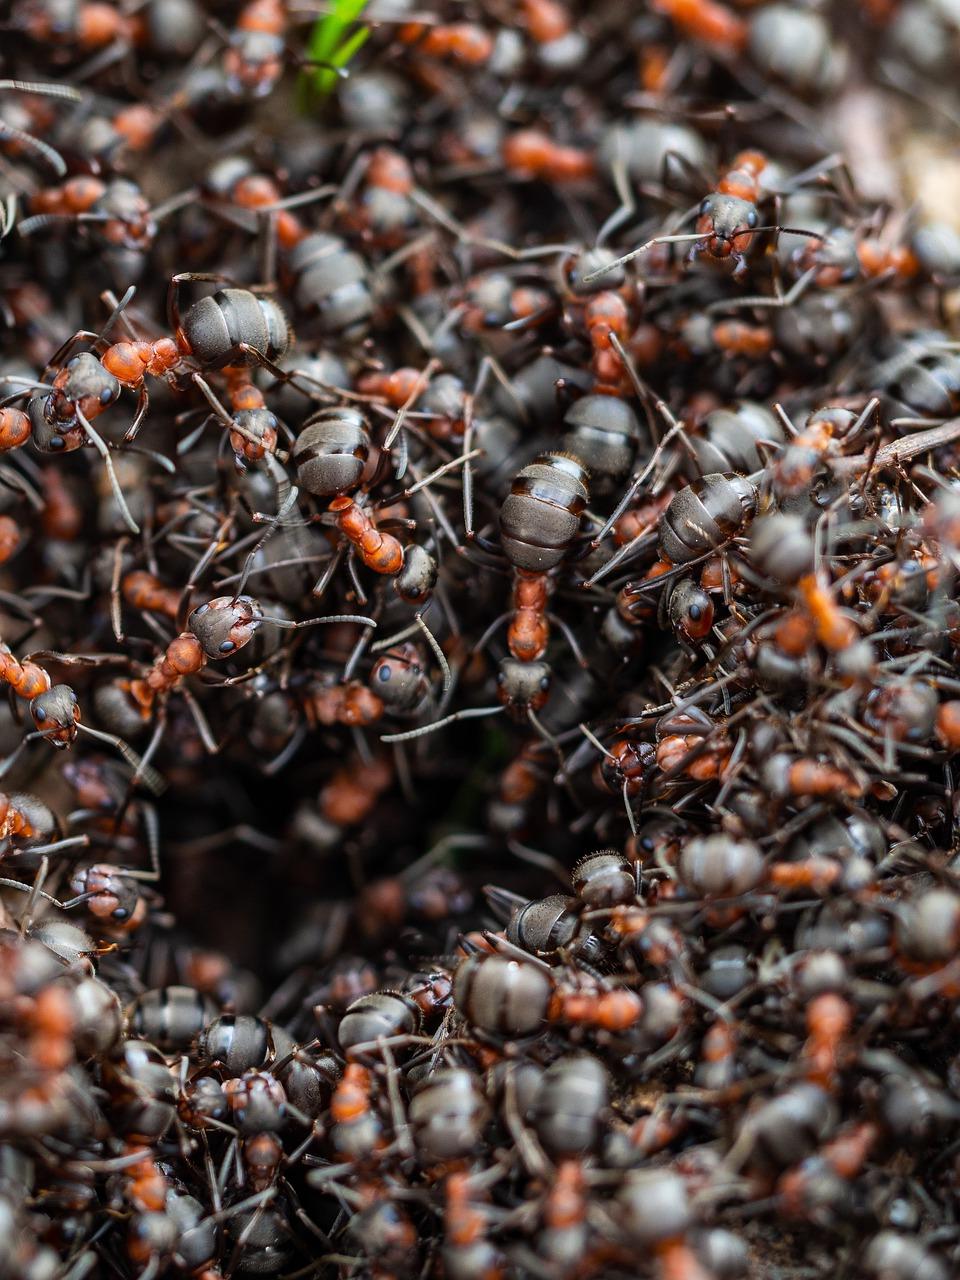 The Symbolic Meaning Behind Ants Collaboratively Building in Dreams